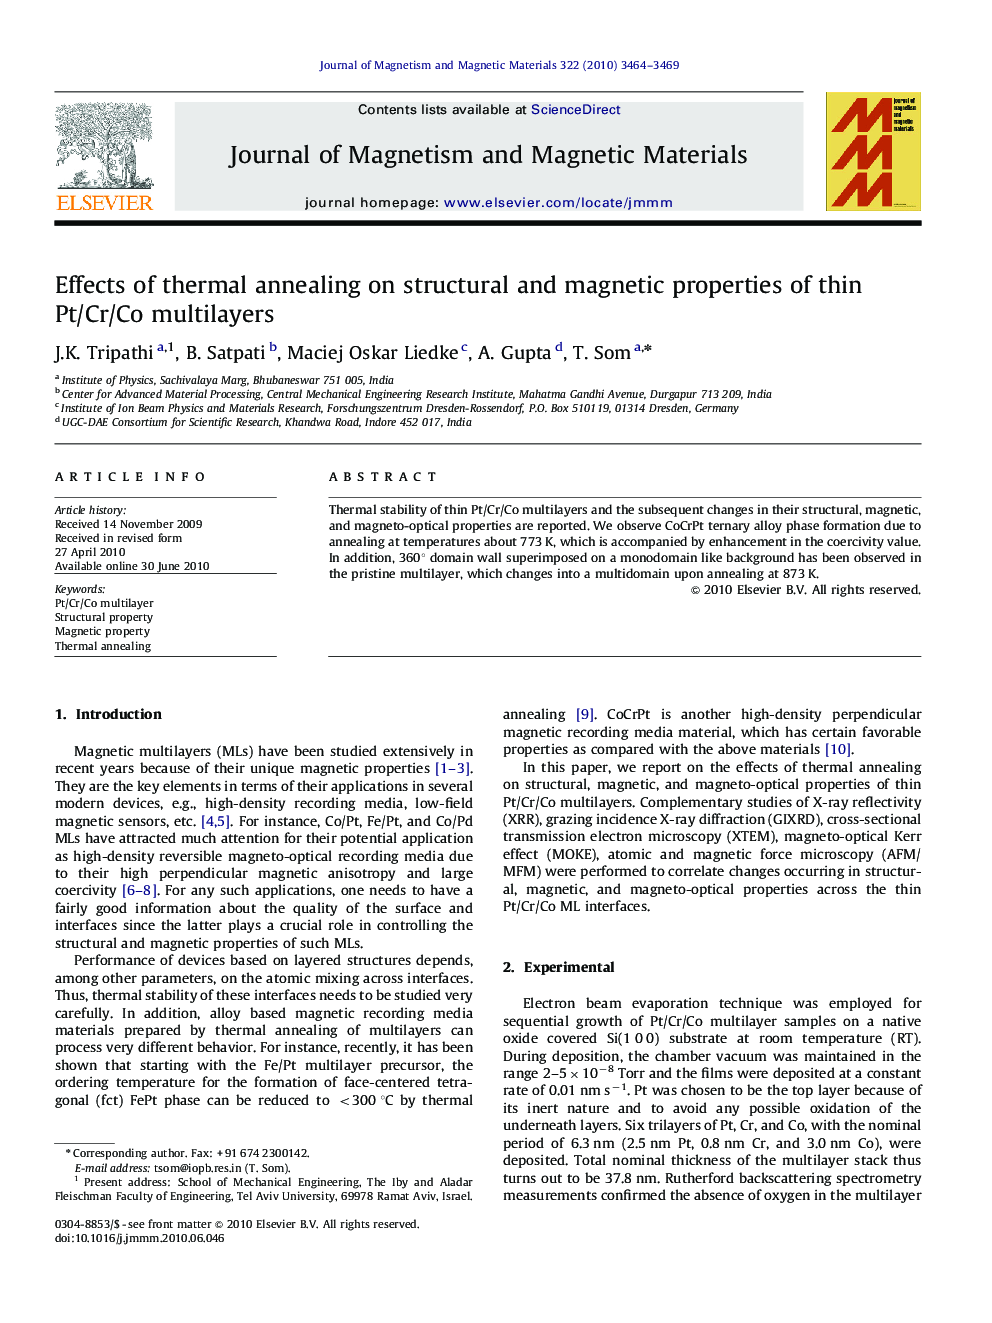 Effects of thermal annealing on structural and magnetic properties of thin Pt/Cr/Co multilayers